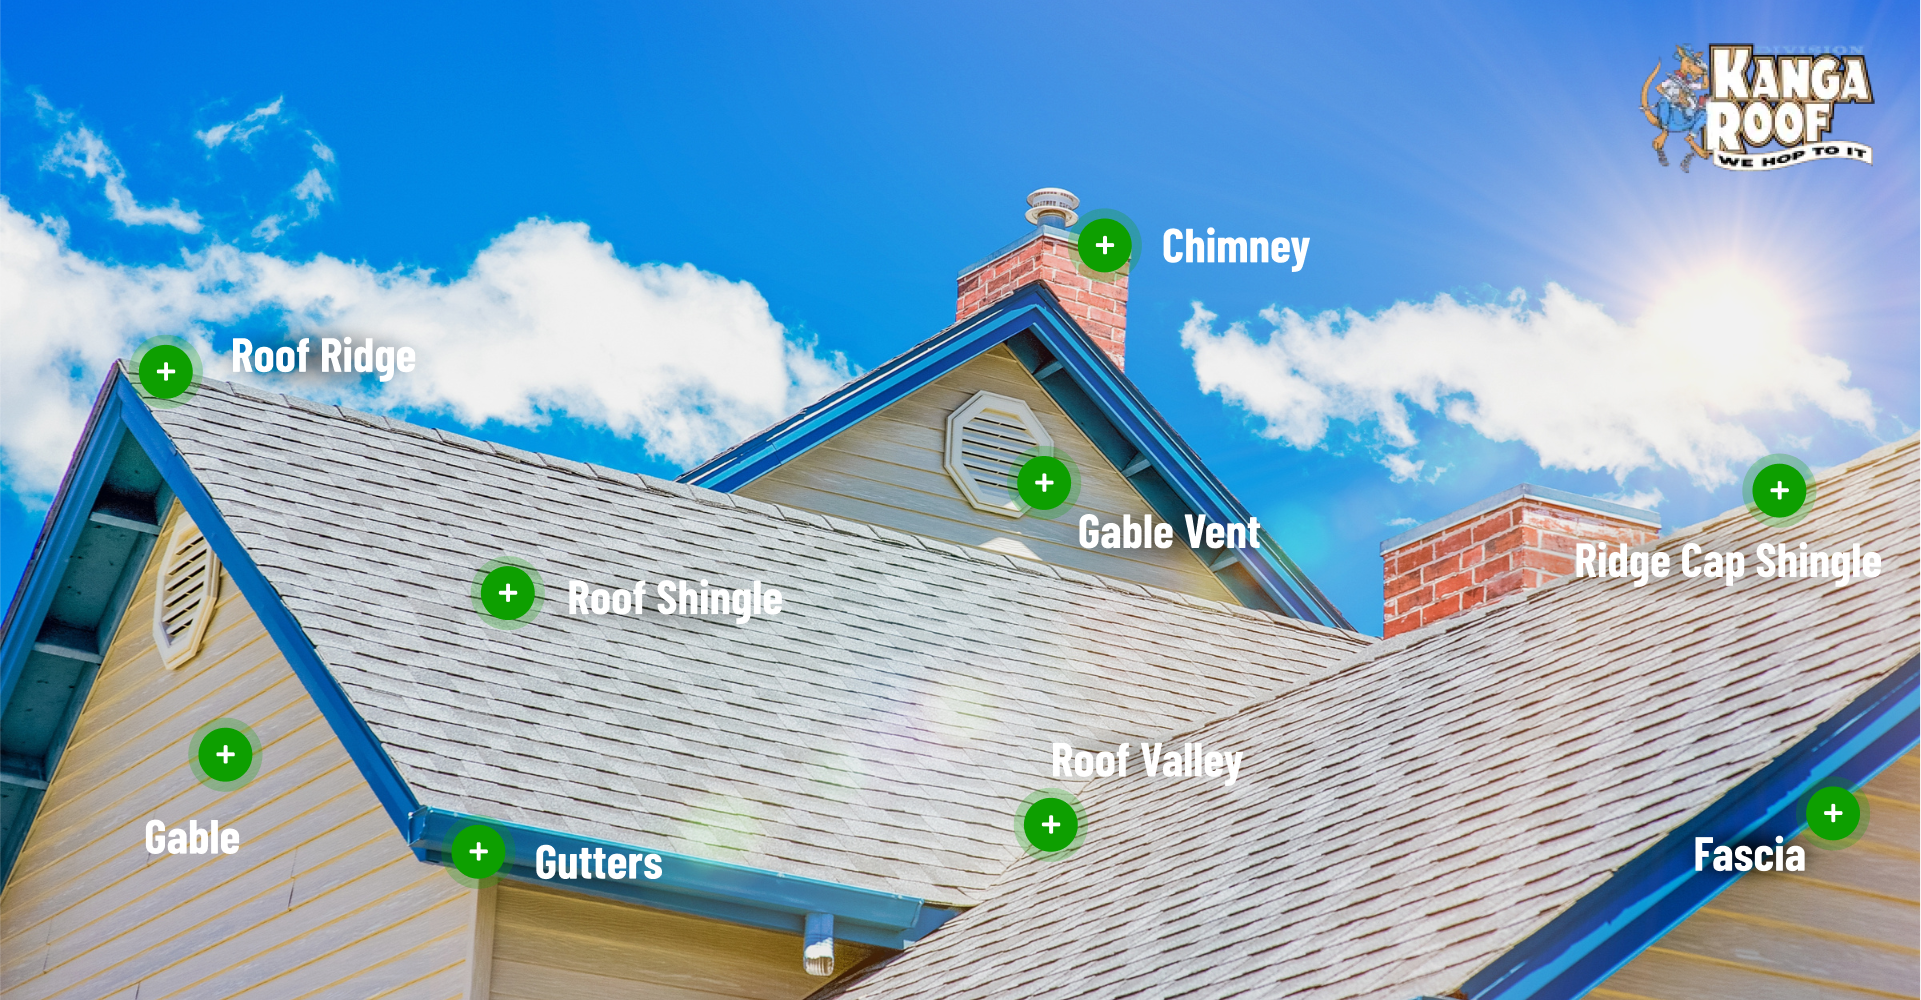 What Are The Different Parts Of A Roof?